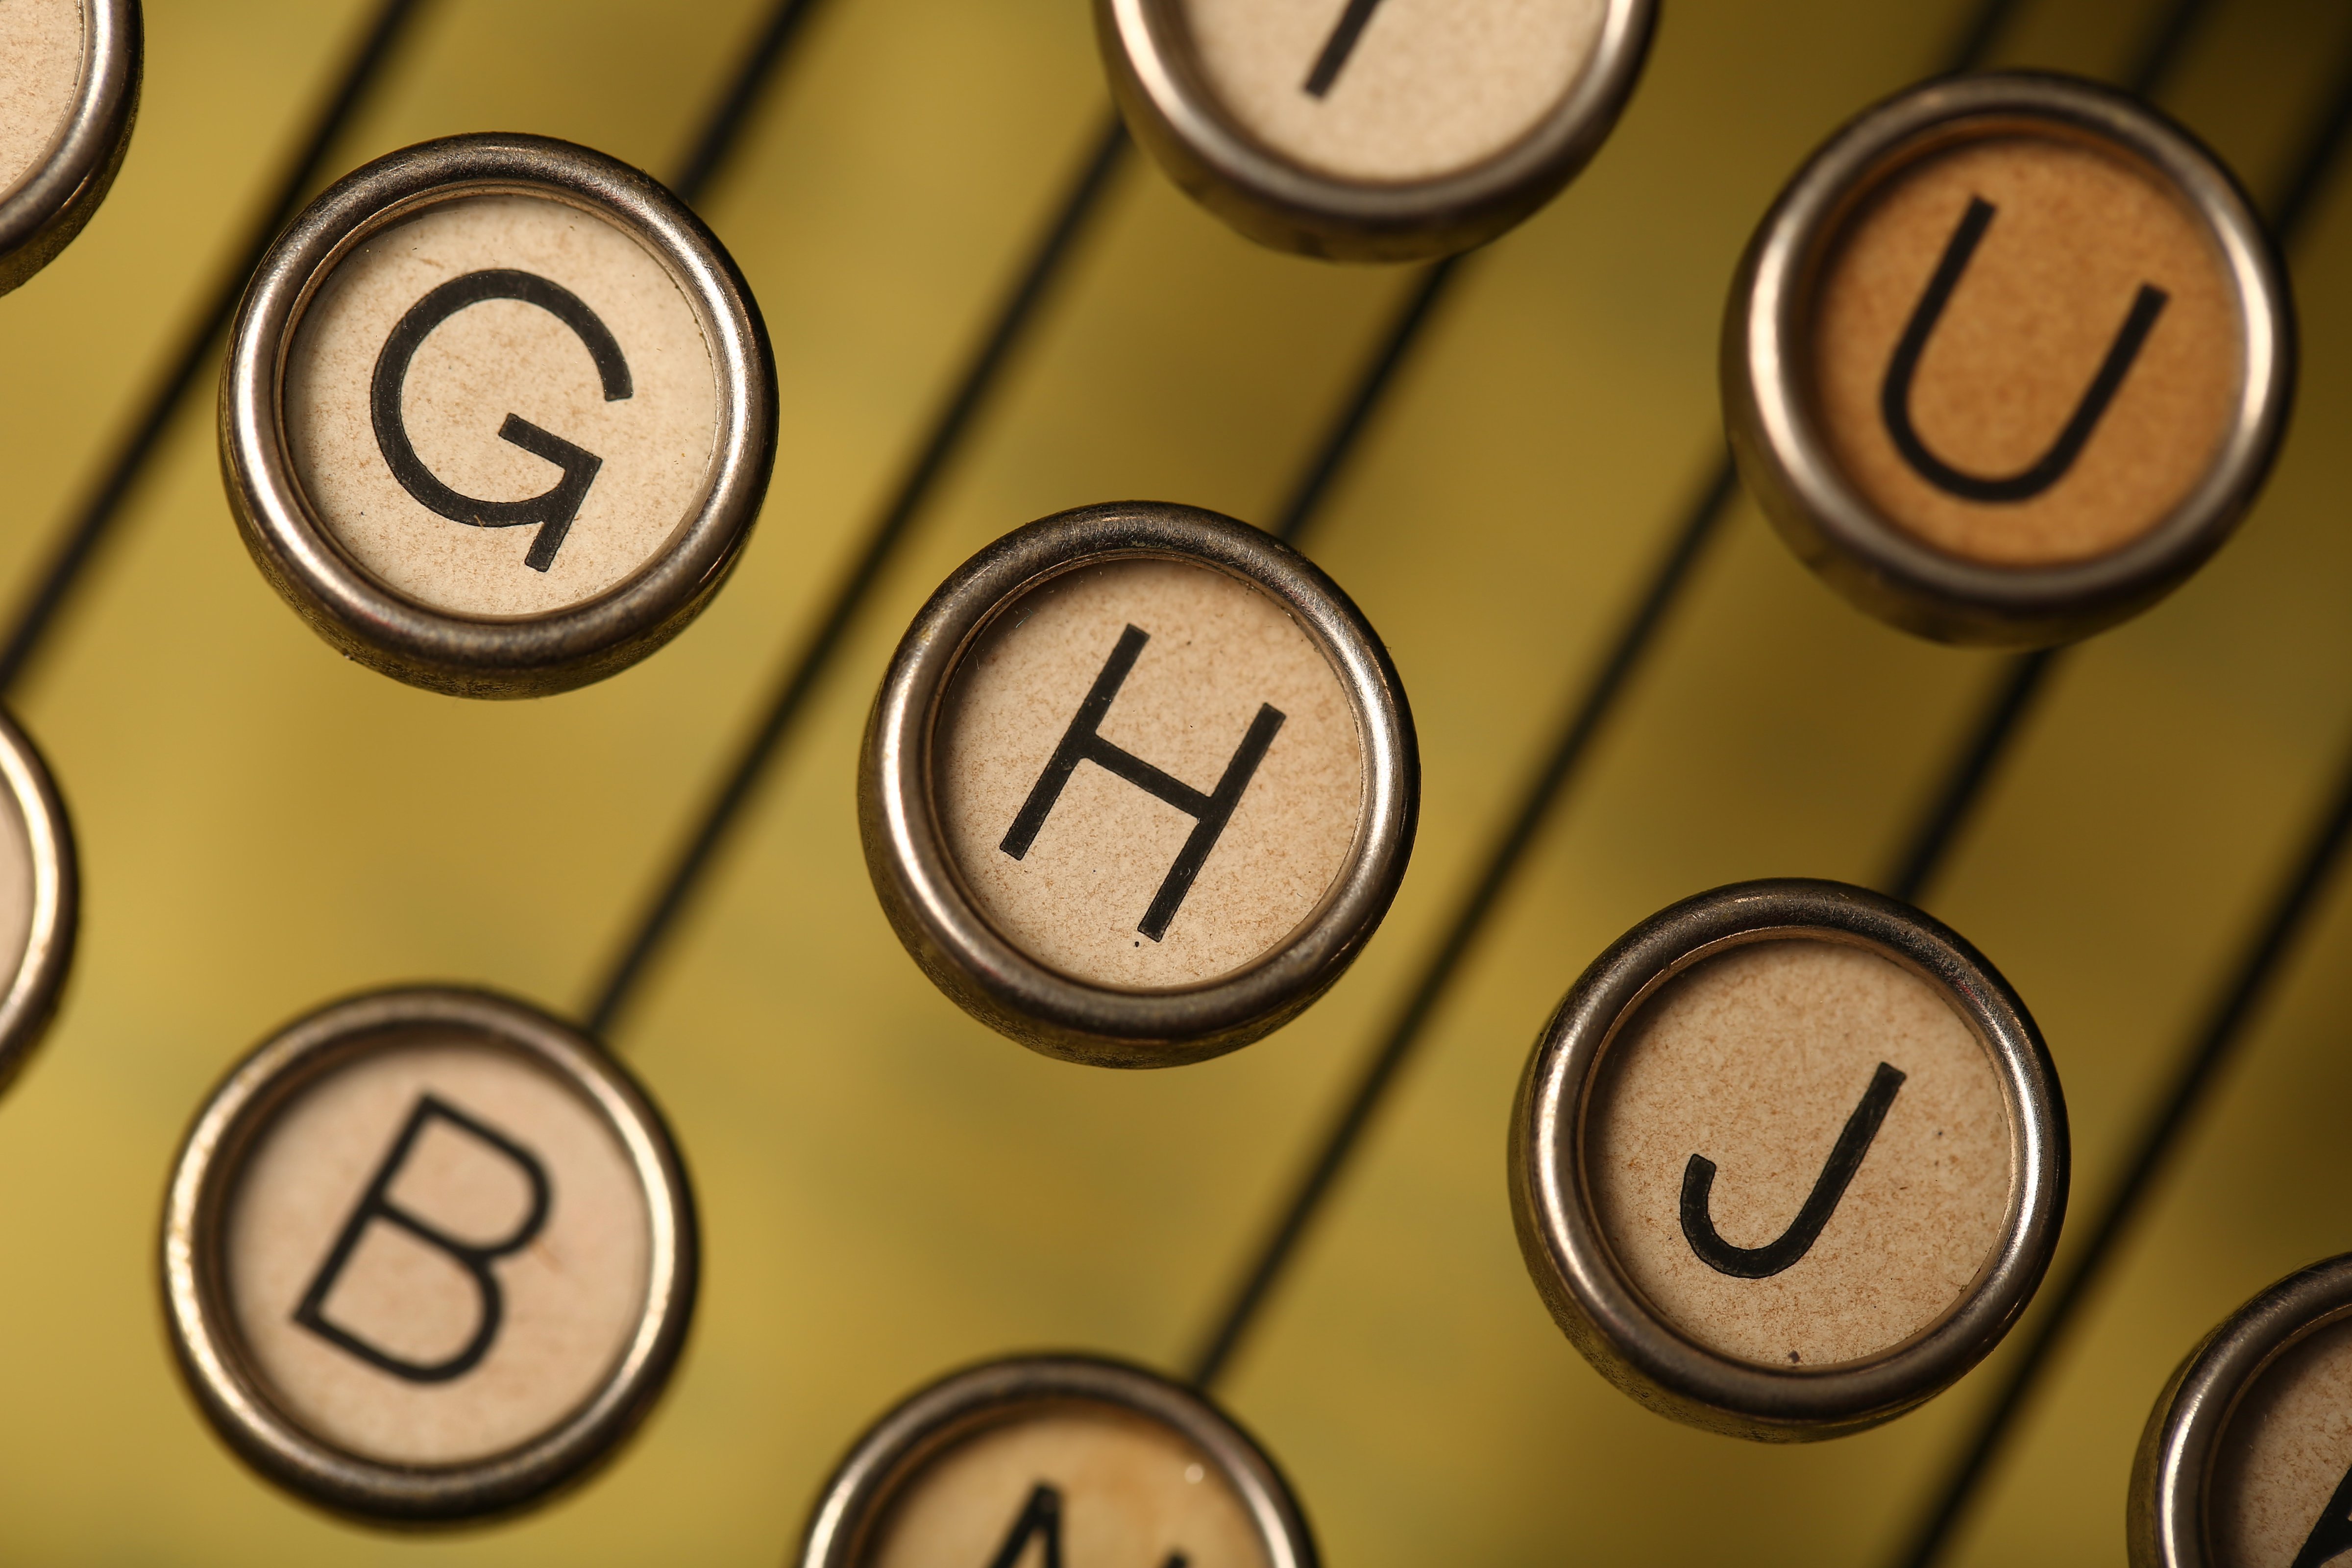 These keys of a circa-1930 Royal portable are photographed on Thursday, August 14, 2014. (Boston Globe&mdash;Boston Globe via Getty Images)